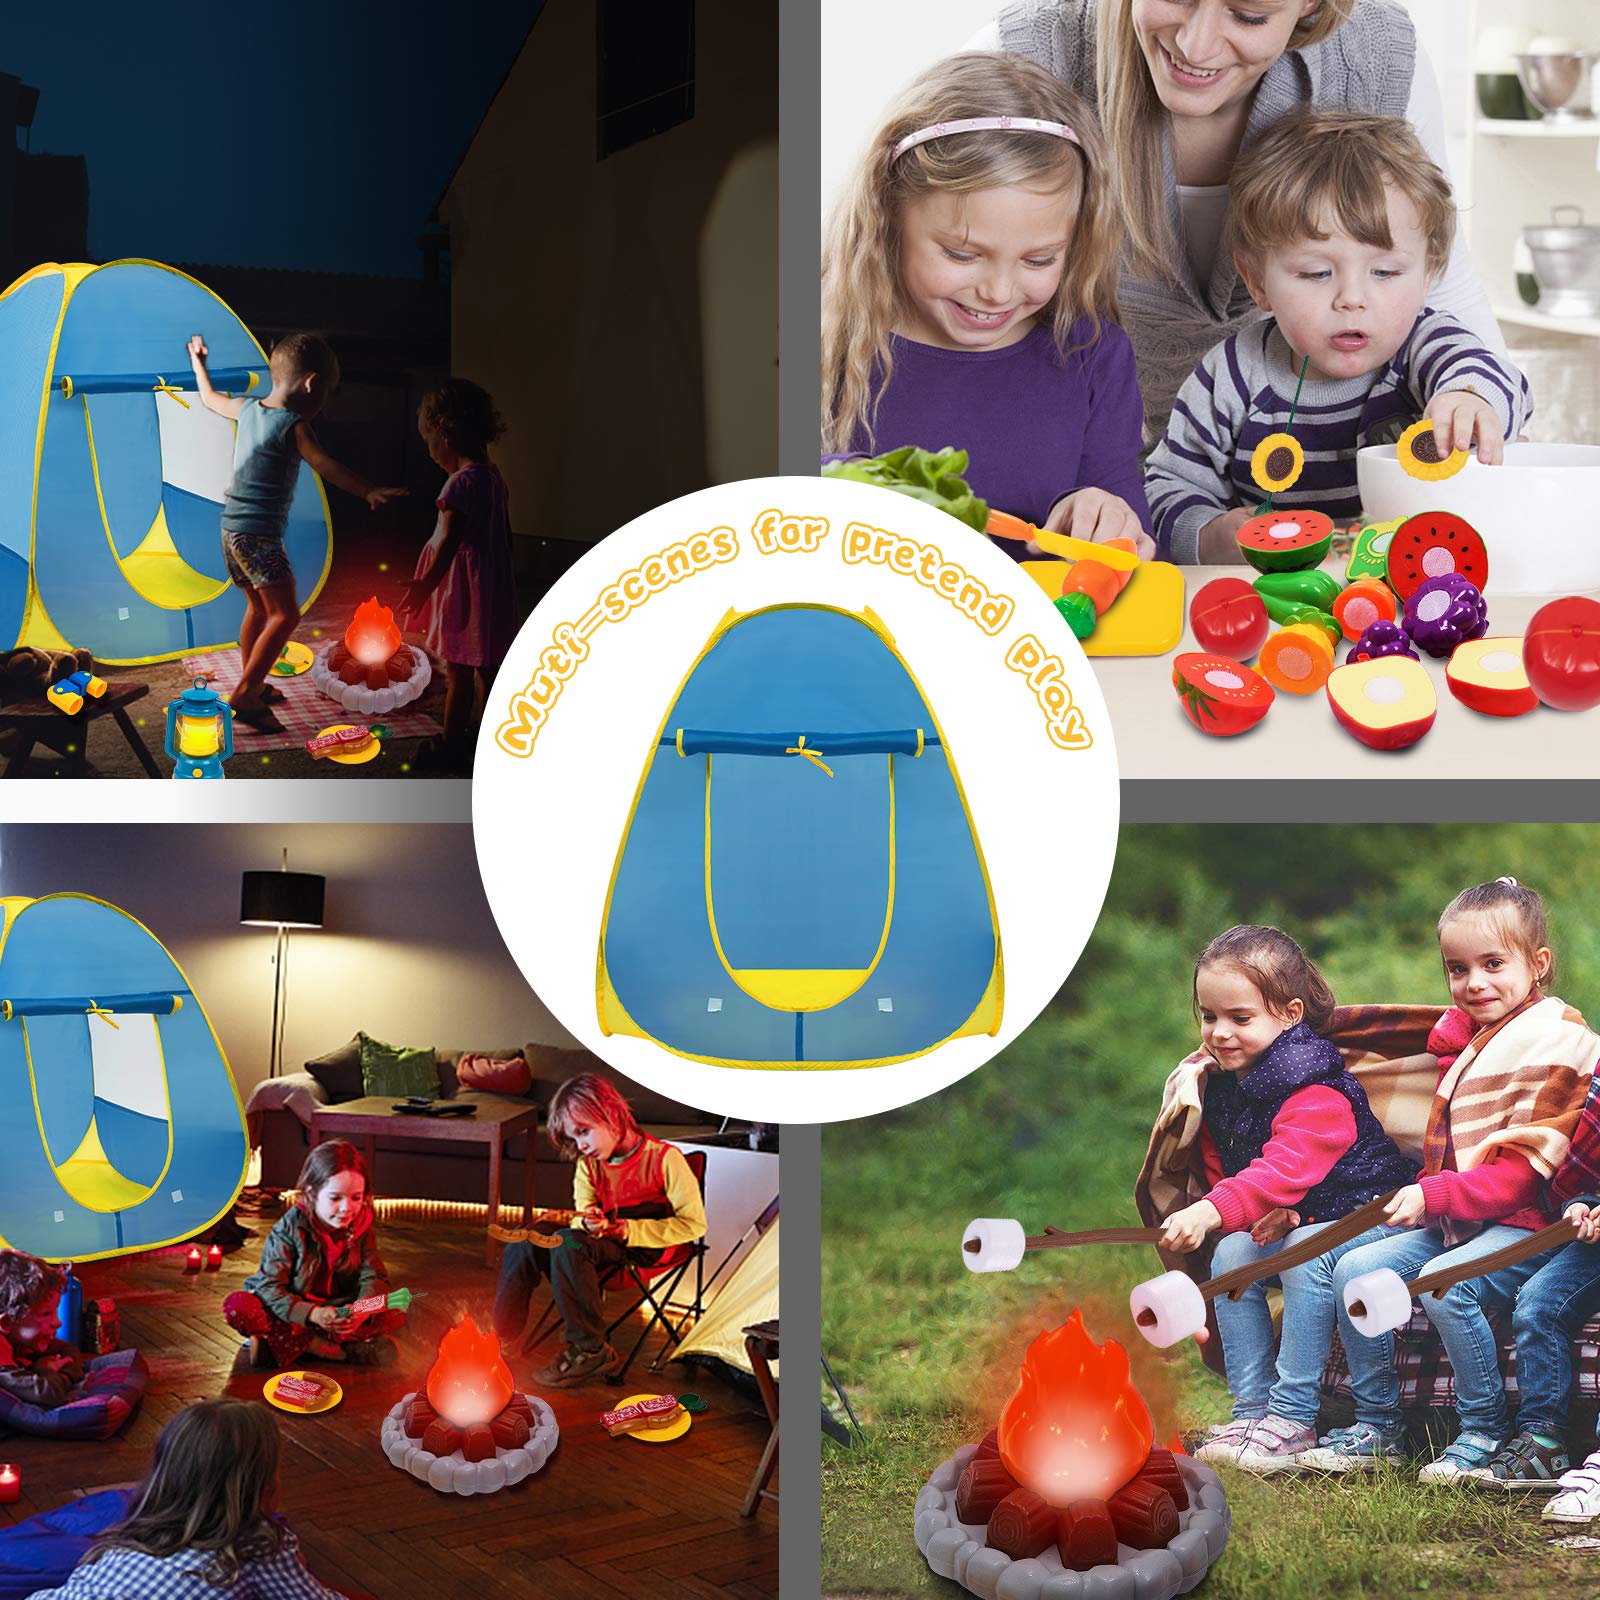 MITCIEN Kids Camping Play Tent with Toy Campfire / Marshmallow /Fruits Toys Play Tent Set for Boys Girls Indoor Outdoor Pretend-Play Game